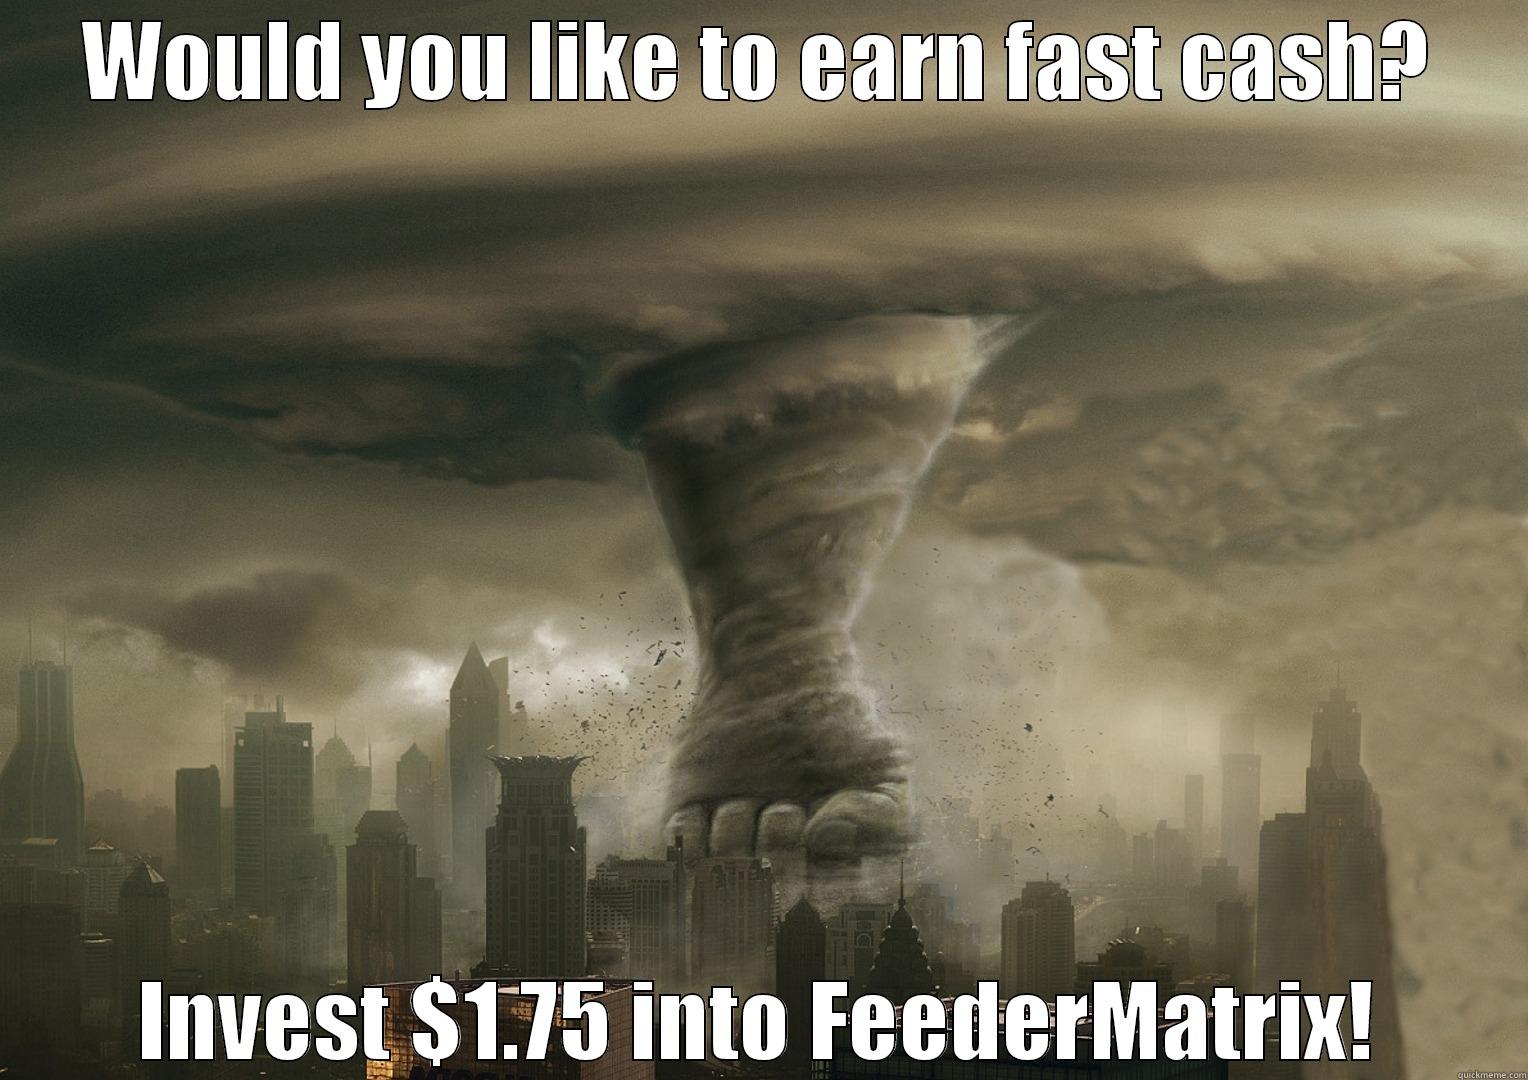 Tornado Fast Cash - WOULD YOU LIKE TO EARN FAST CASH? INVEST $1.75 INTO FEEDERMATRIX! Misc